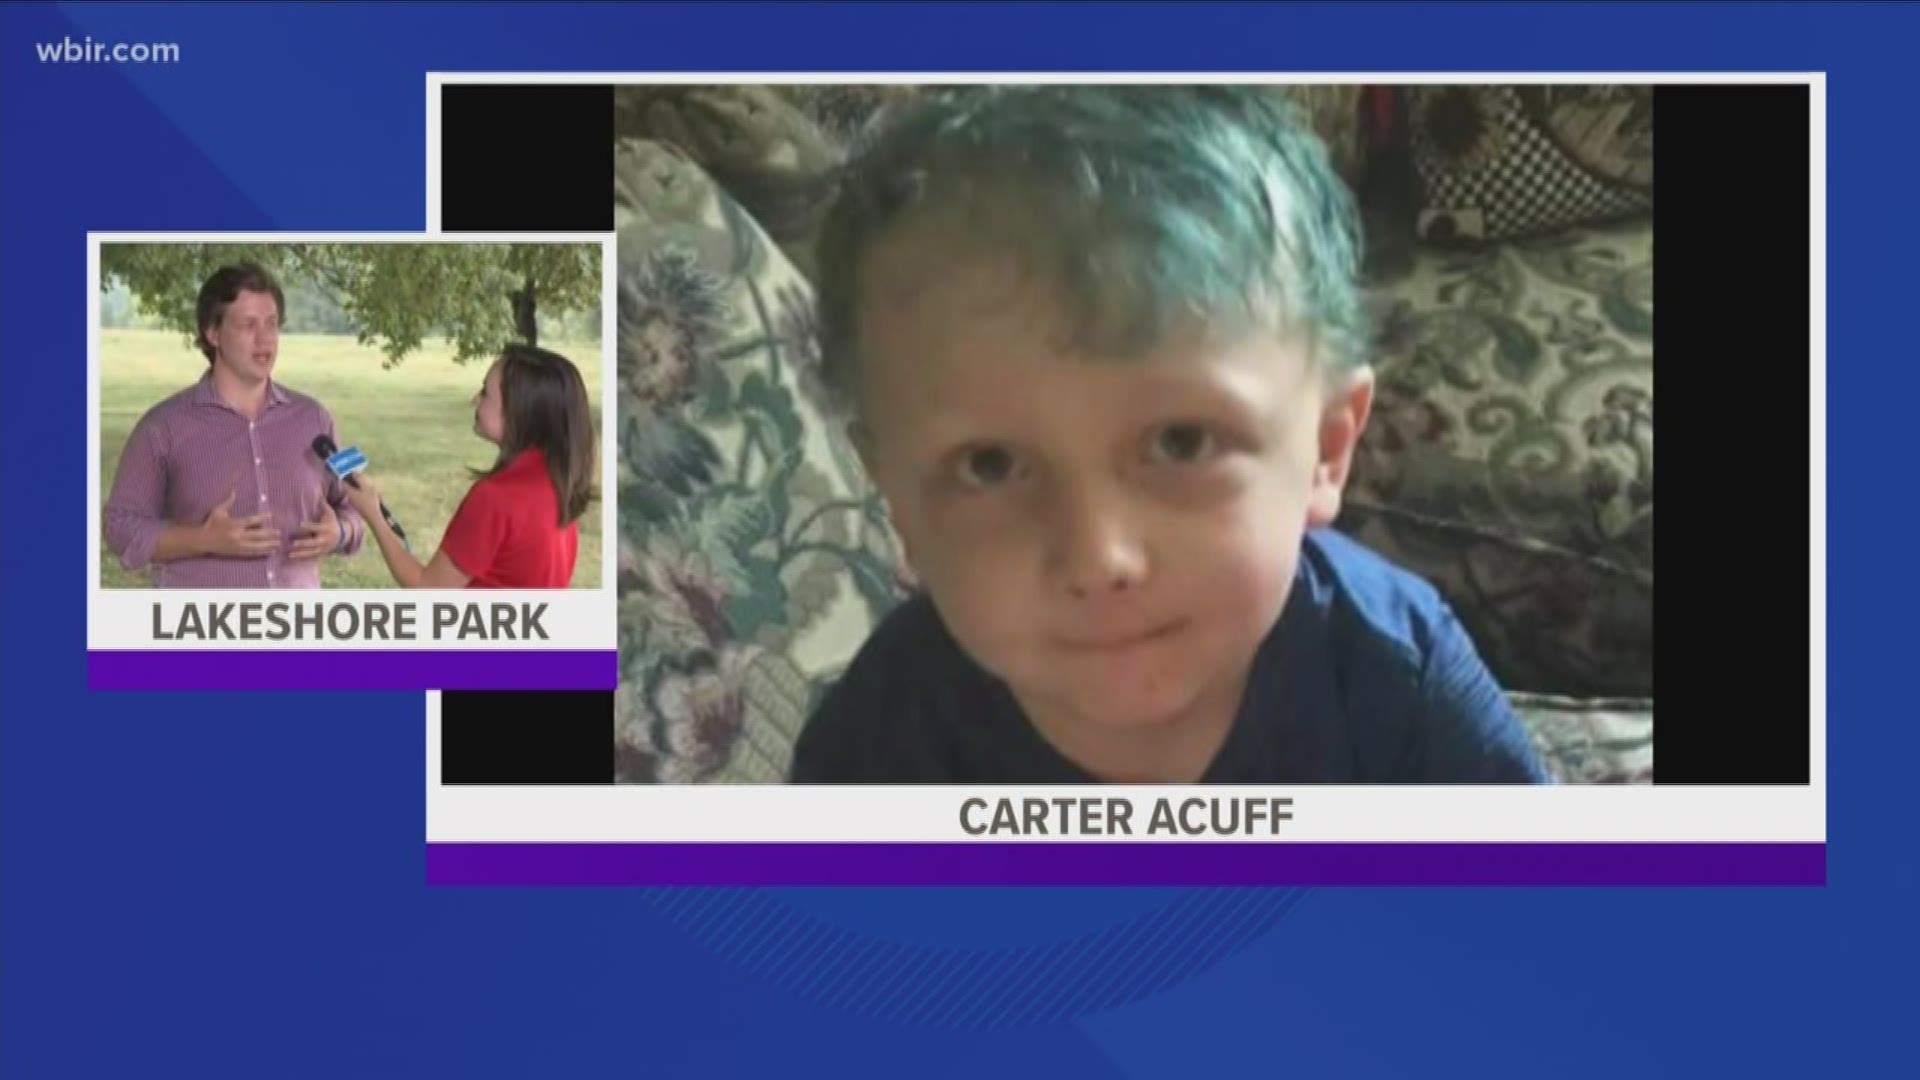 Carter's cinema at Lakeshore Park Saturday is raising money to support Carter Acuff who is battling Leukemia.